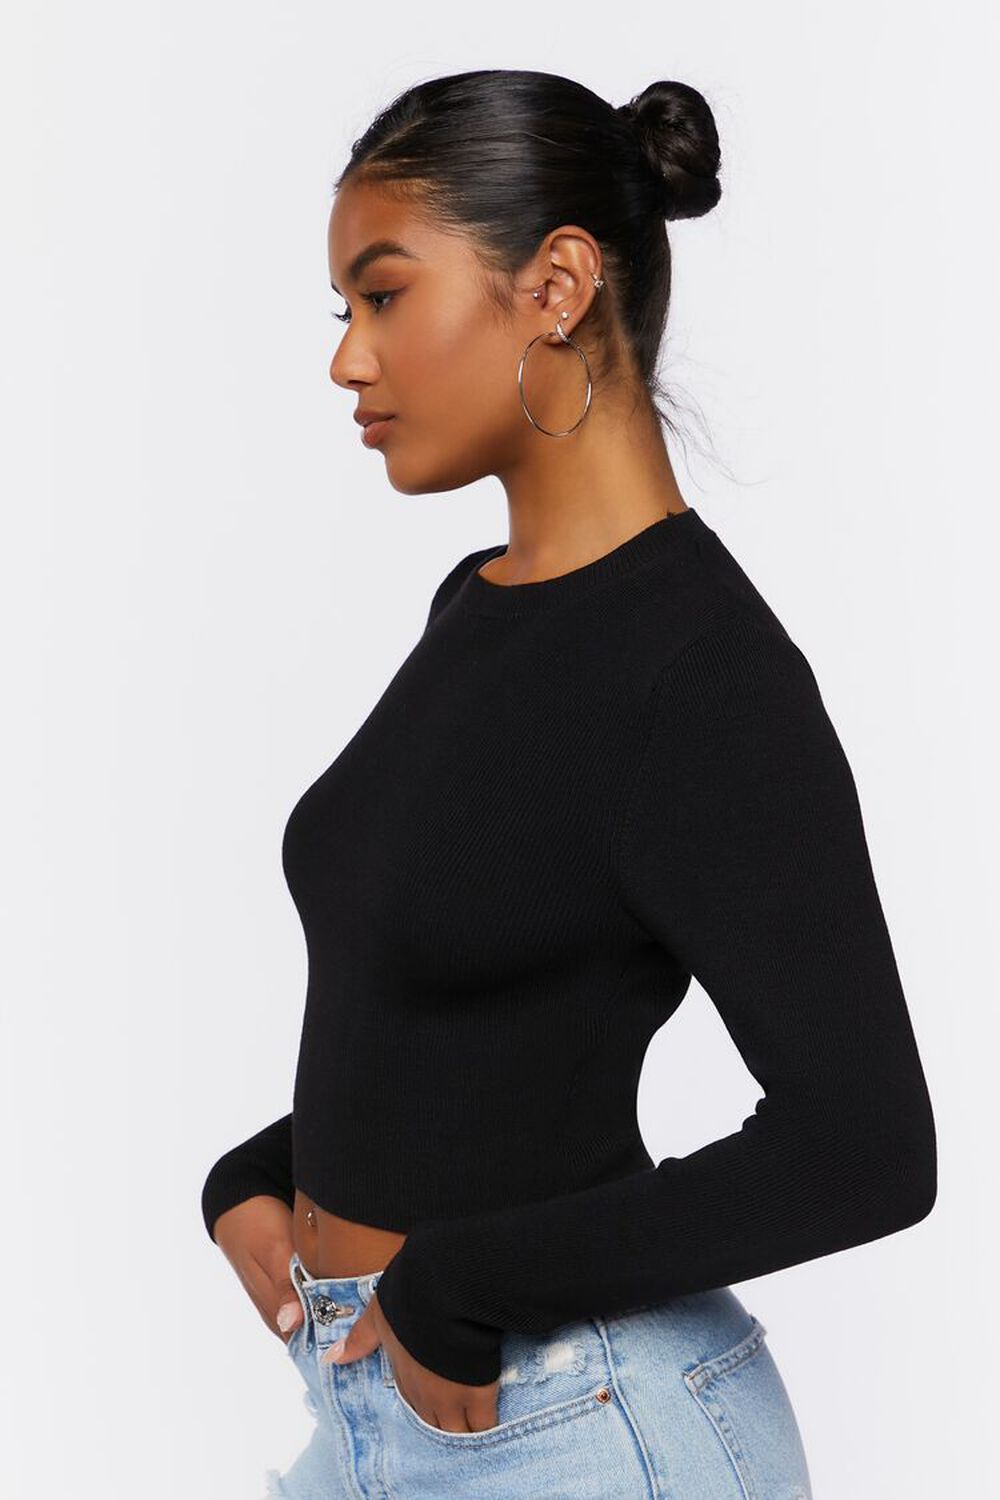 BLACK Ribbed Knit Sweater Top, image 2